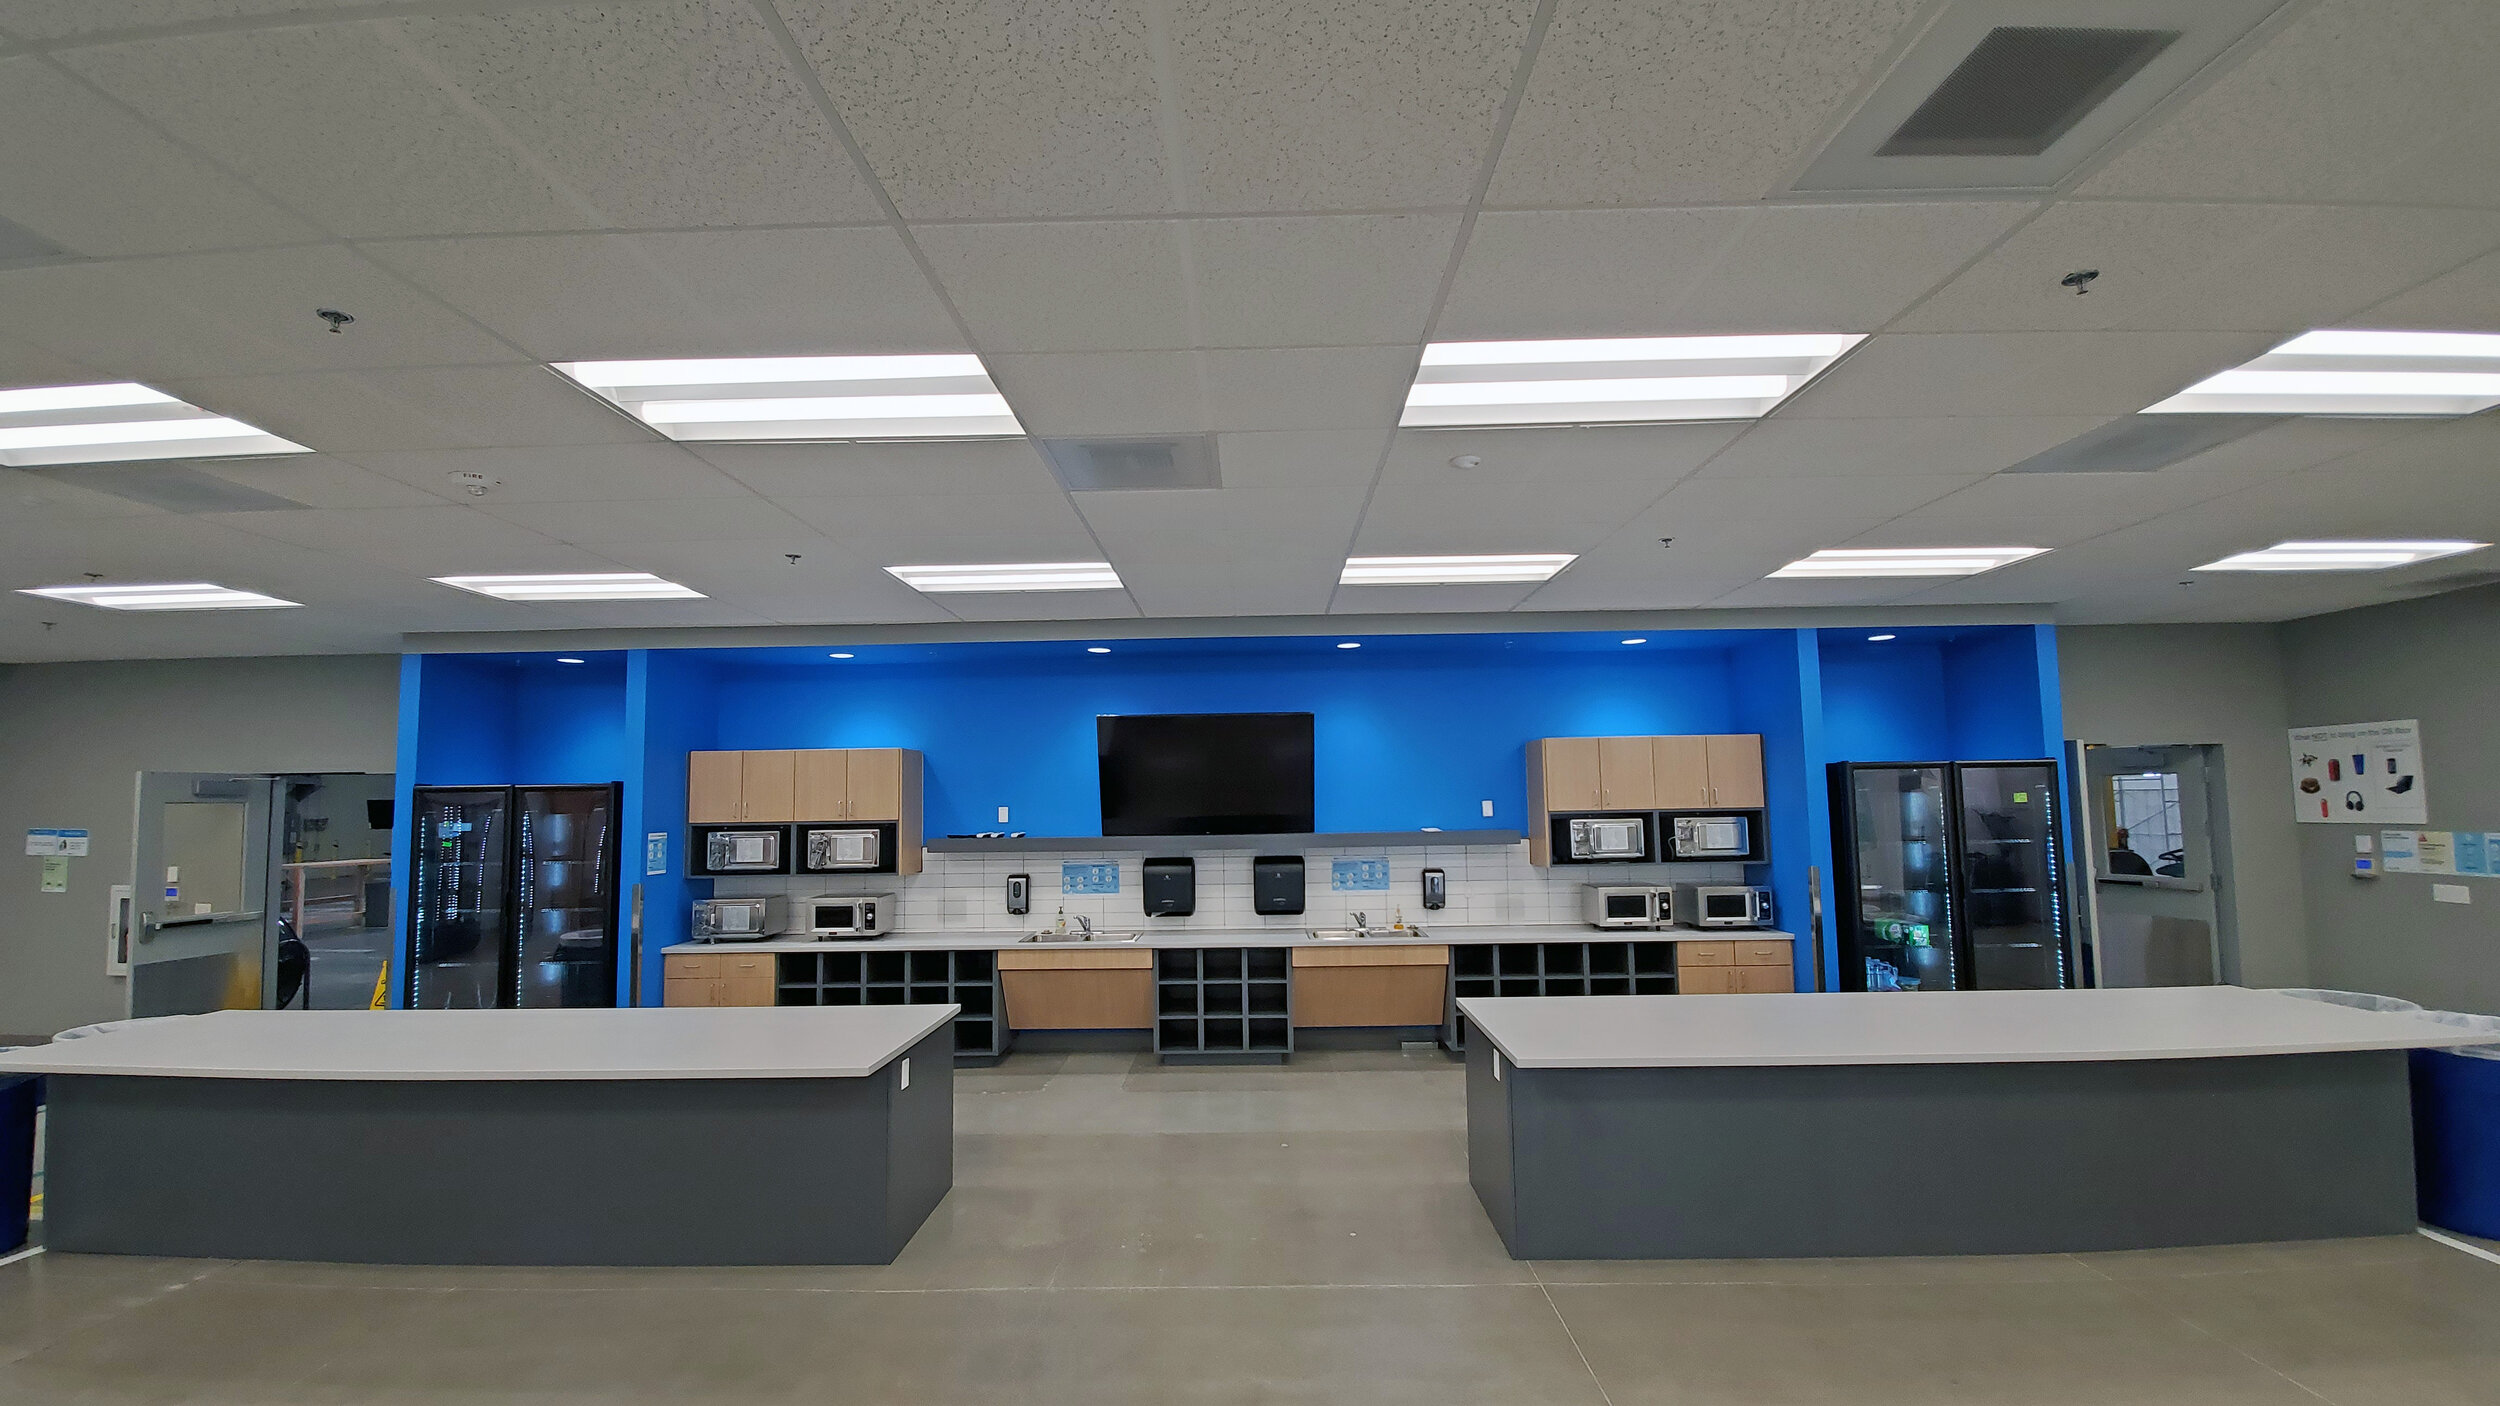 Precision_Custom_Cabinets_San_Diego_Commercial_Cabinetry_Amazon_Warehouse_Breakroom 39.jpg